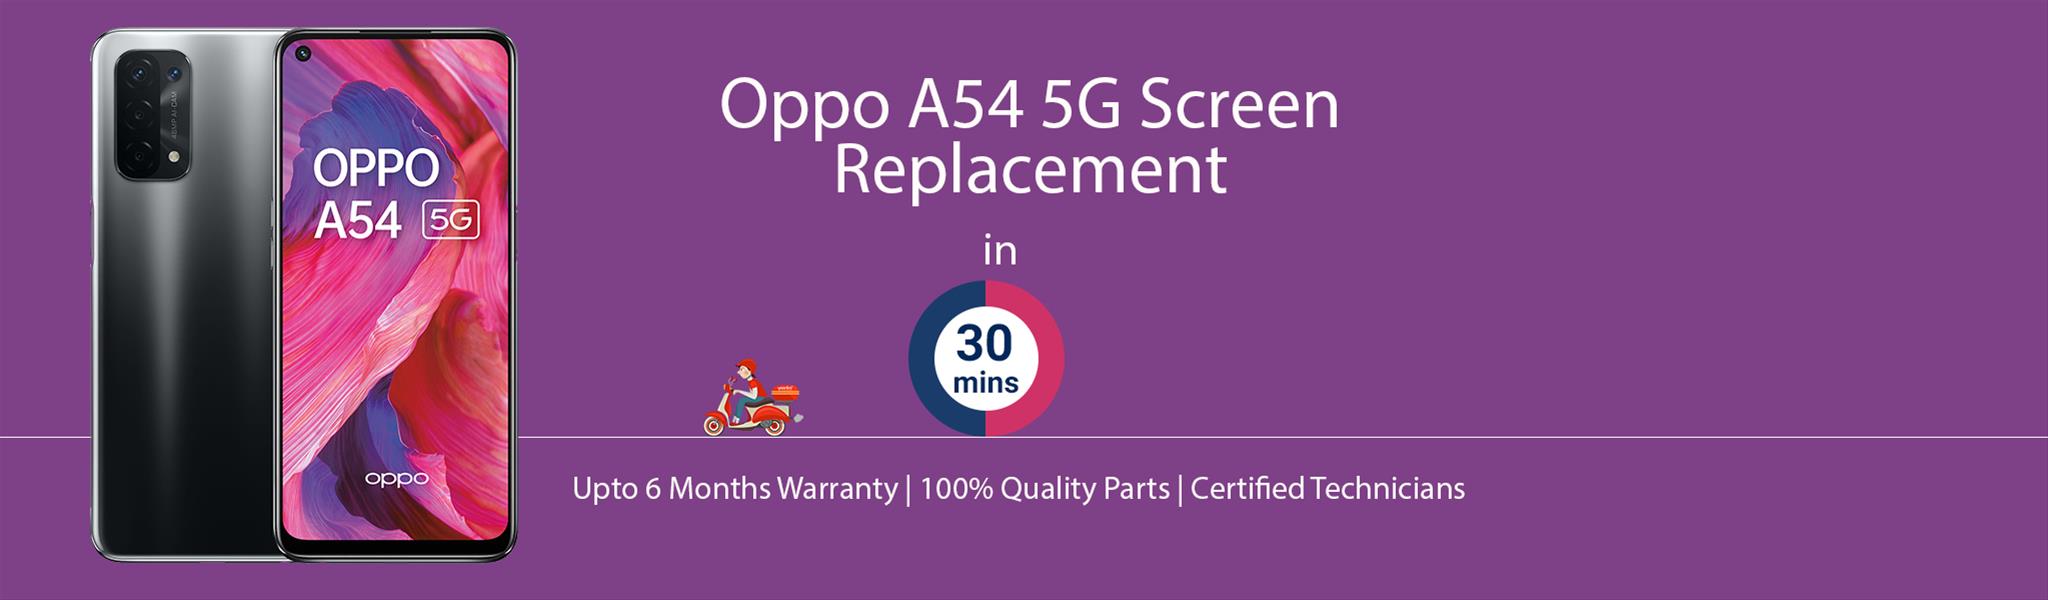 oppo-a54-5g-screen-replacement.jpg